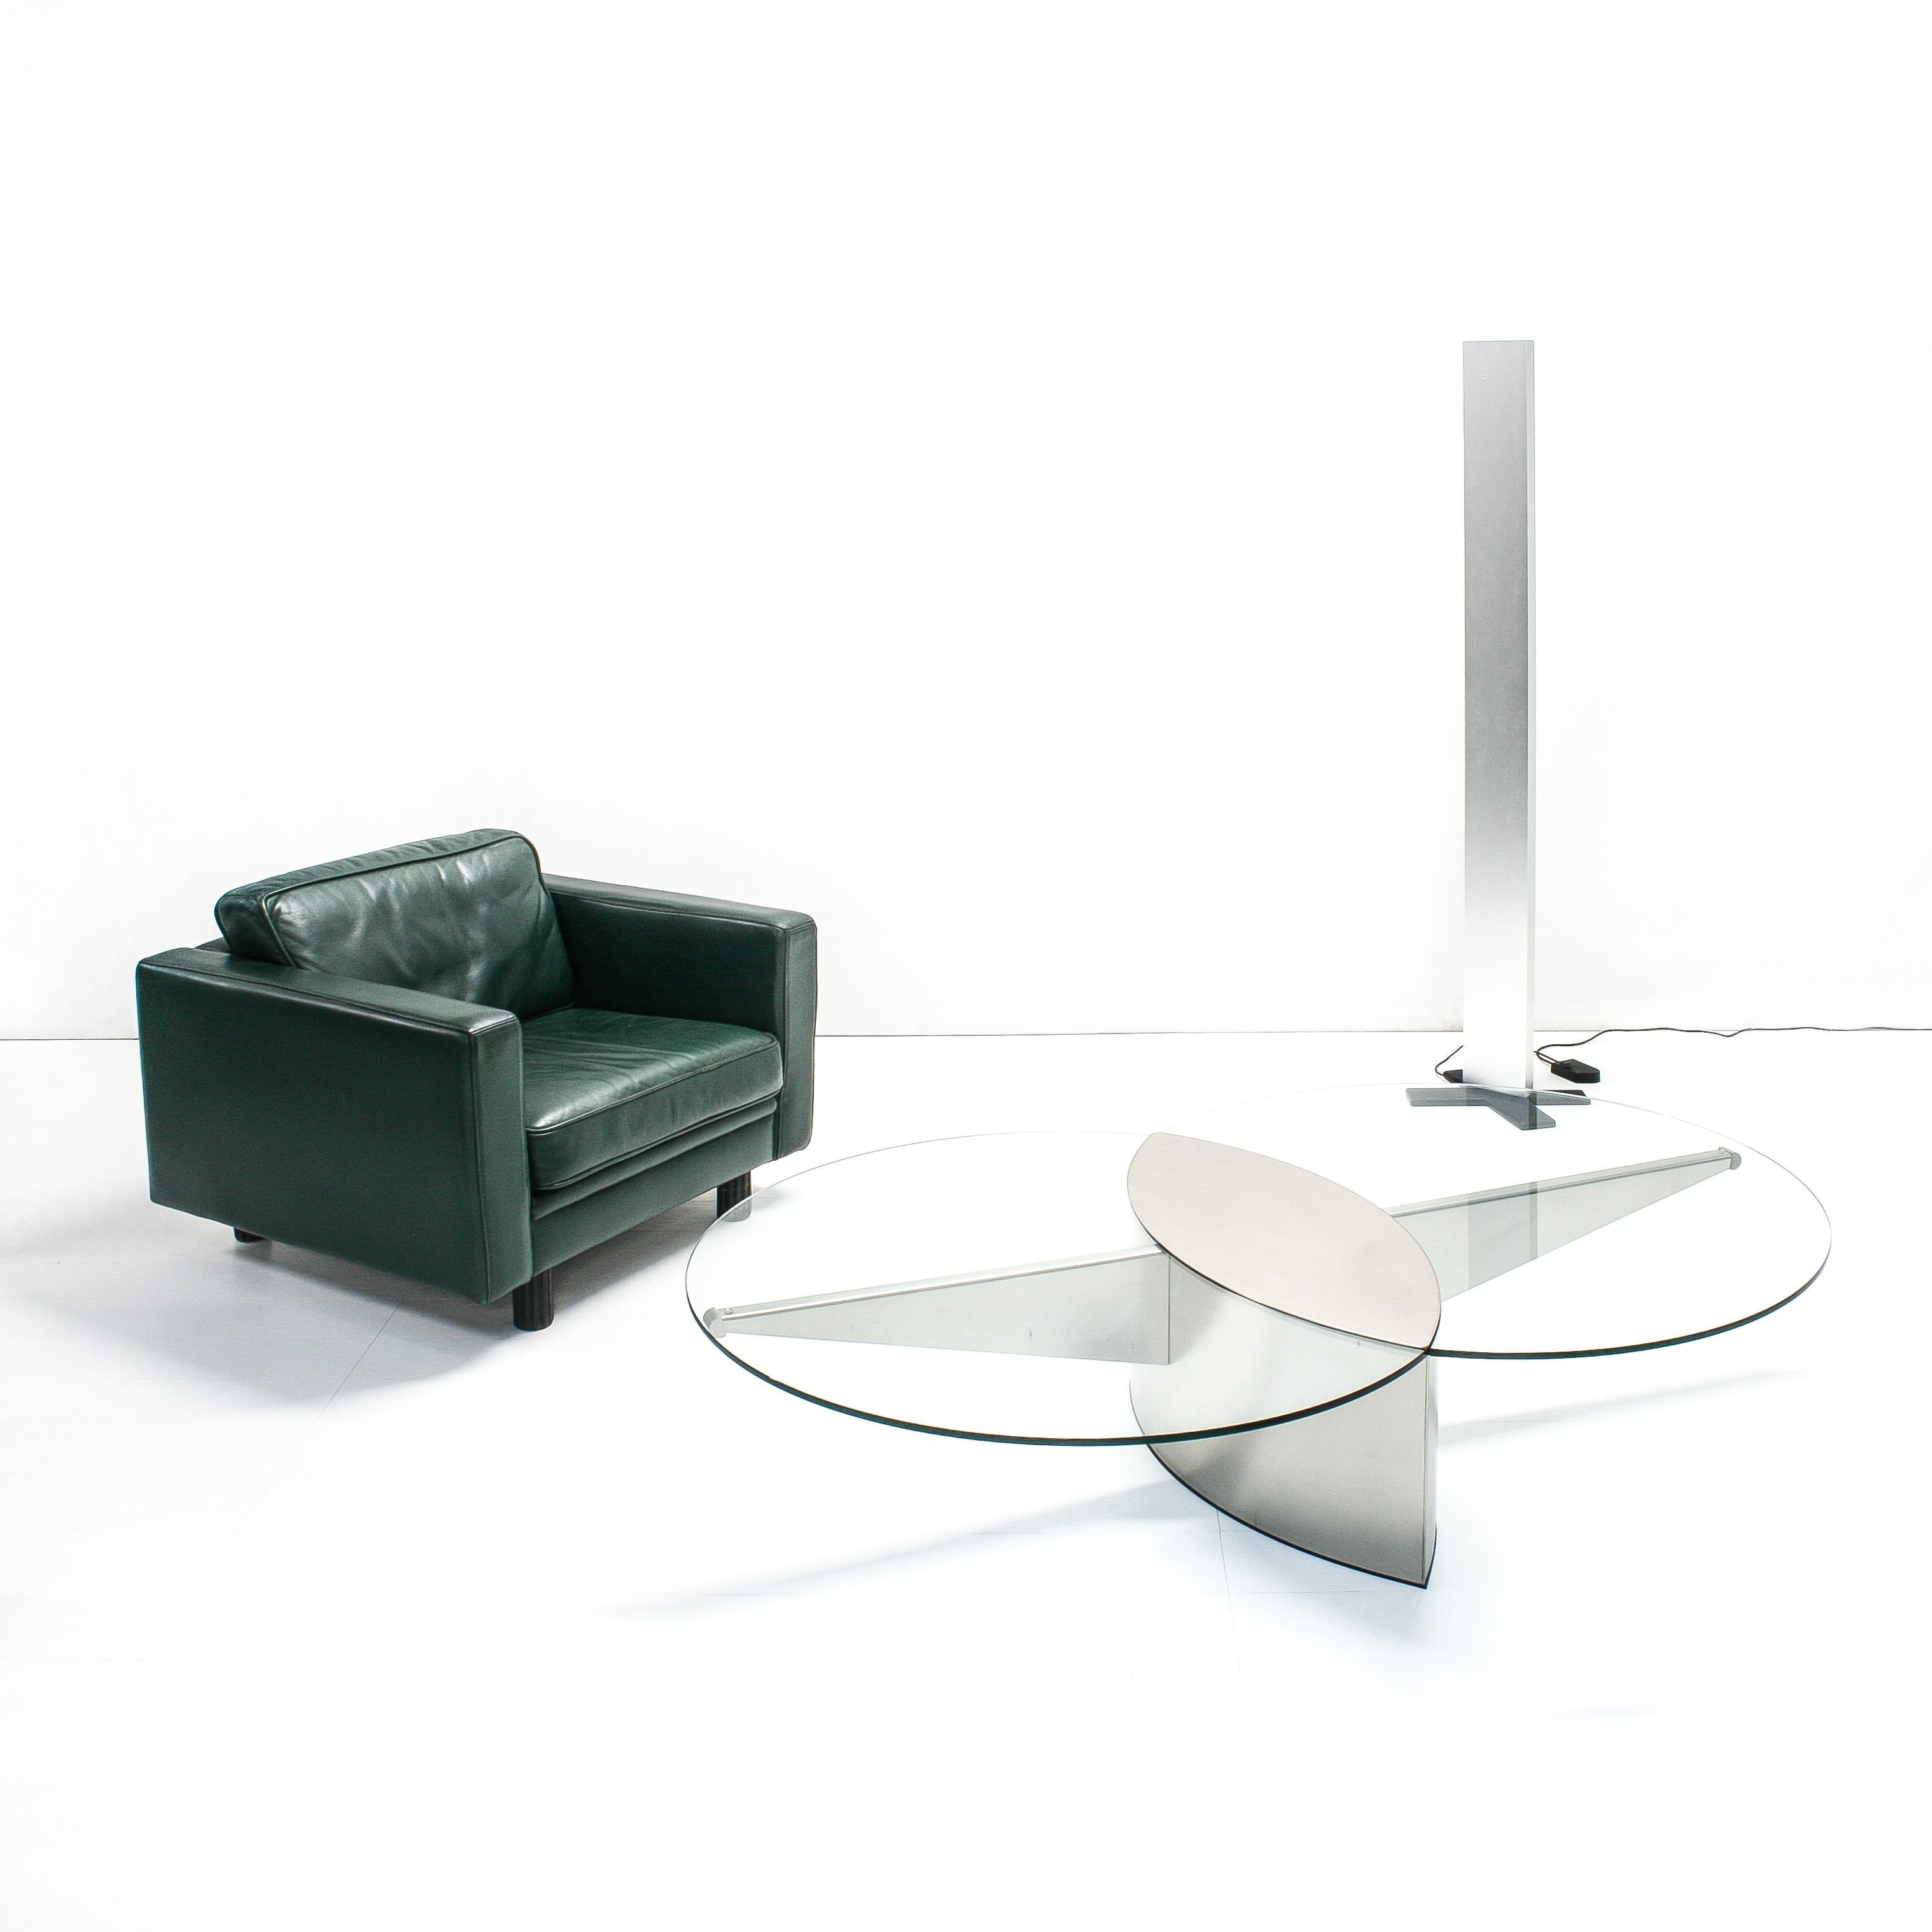 This coffee table was designed by the Belgian artist and furniture designer Koenraad Dewulf and produced by Belgo Chrom, Deinze. It consists of two intersecting glass circles on a symmetric stainless steel base.